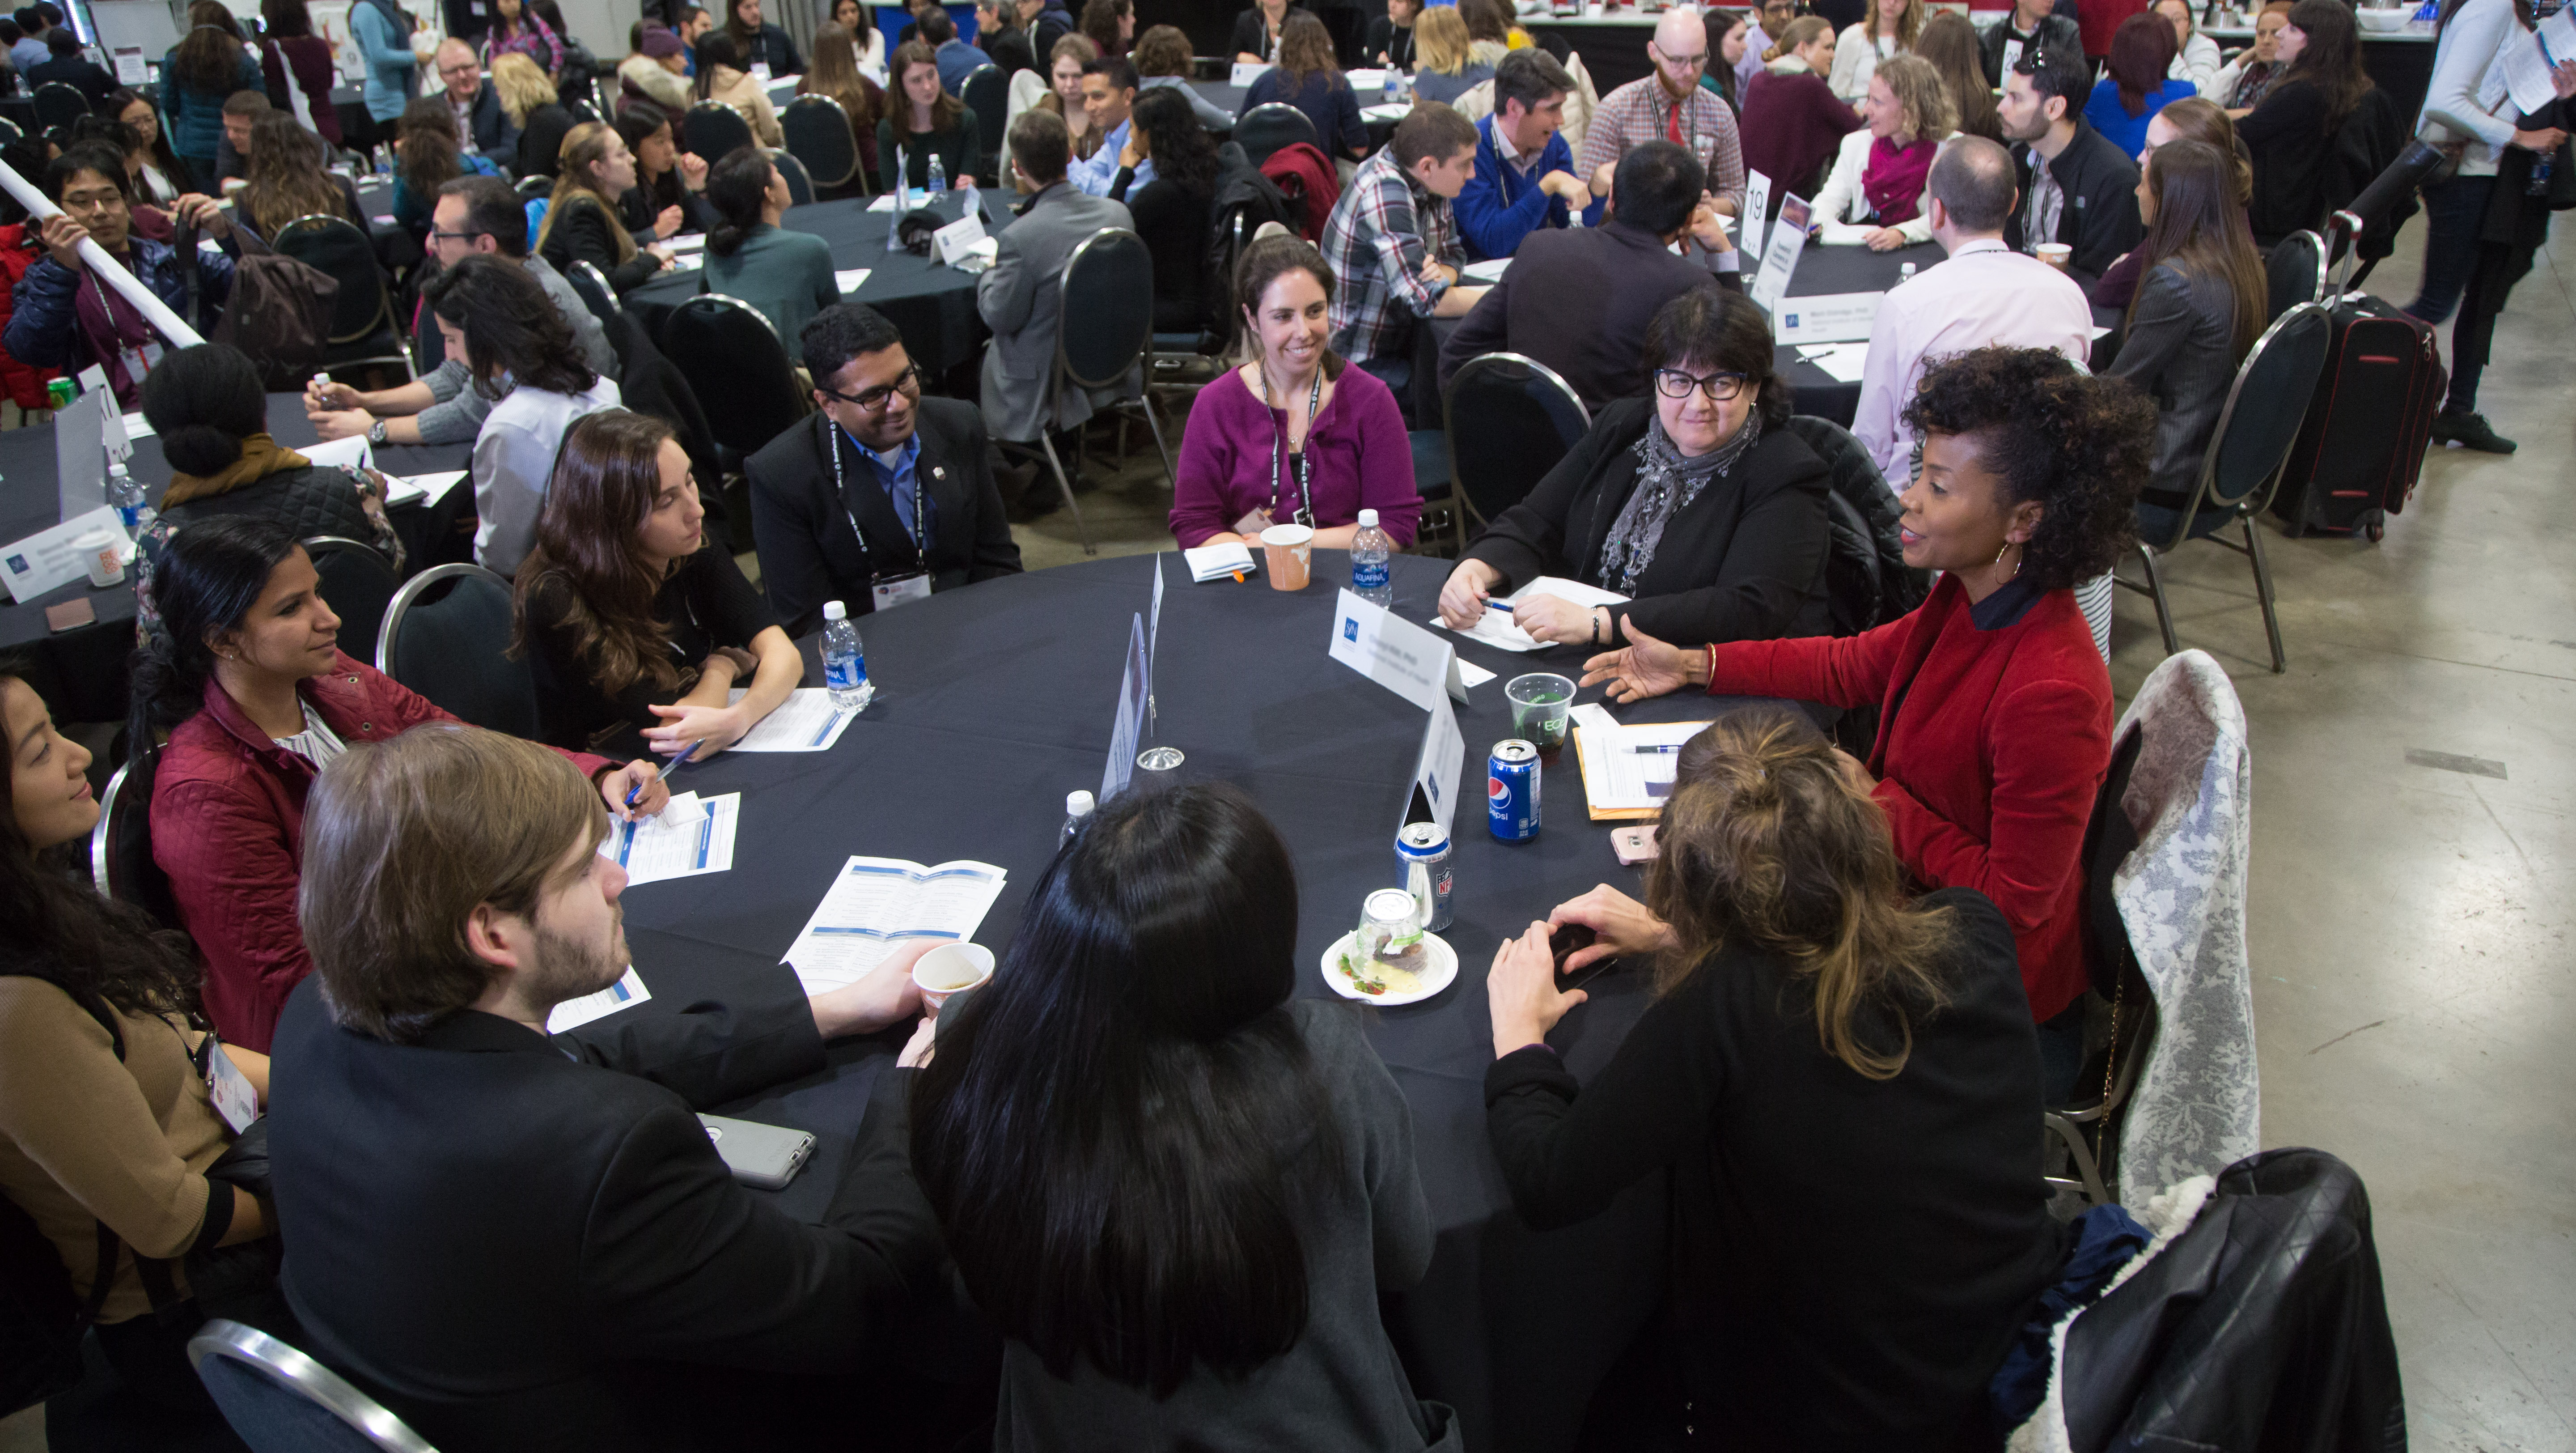 "Career Development Topics: A Networking Event” is one of many events offered at SfN’s annual meeting that encourages attendees to collaborate and share experiences that can help them in their careers.